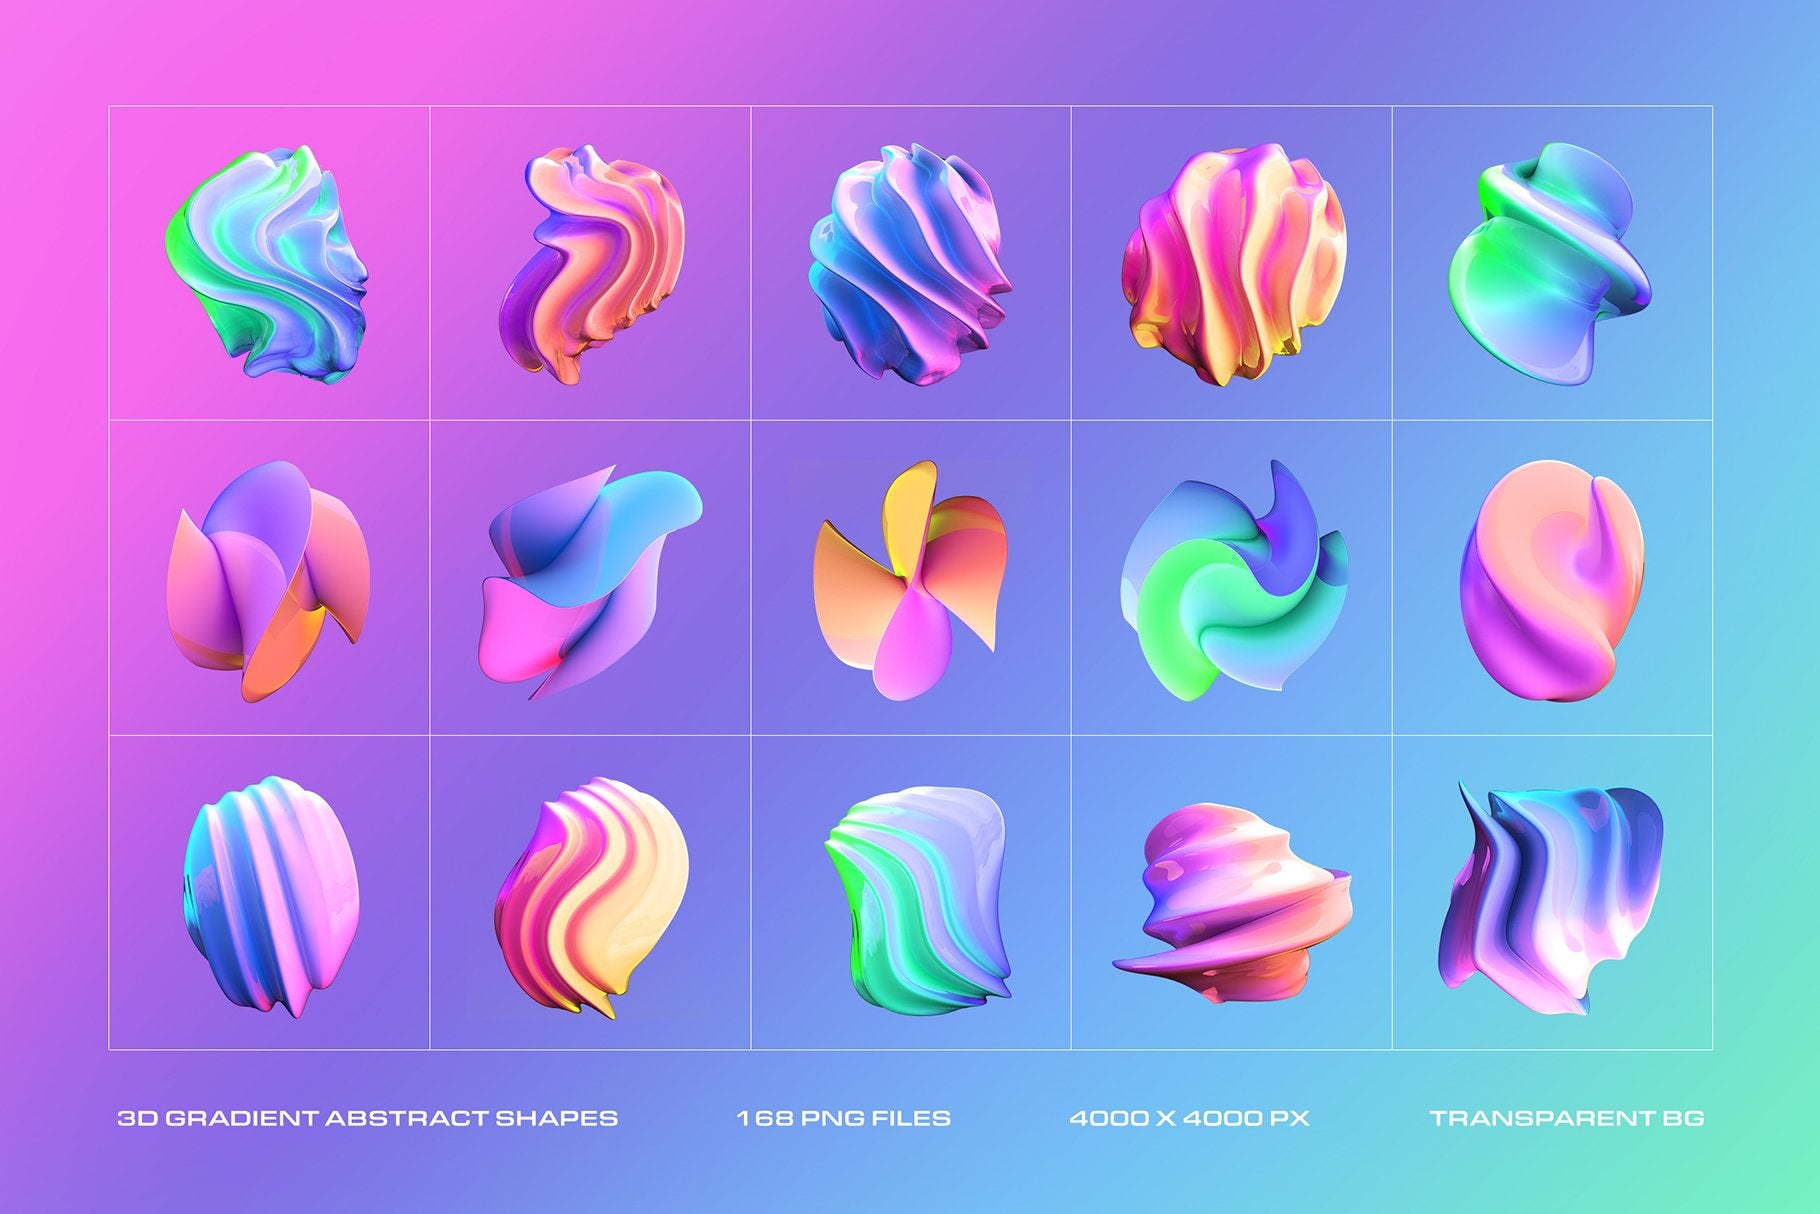 3D Gradient Abstract Shapes